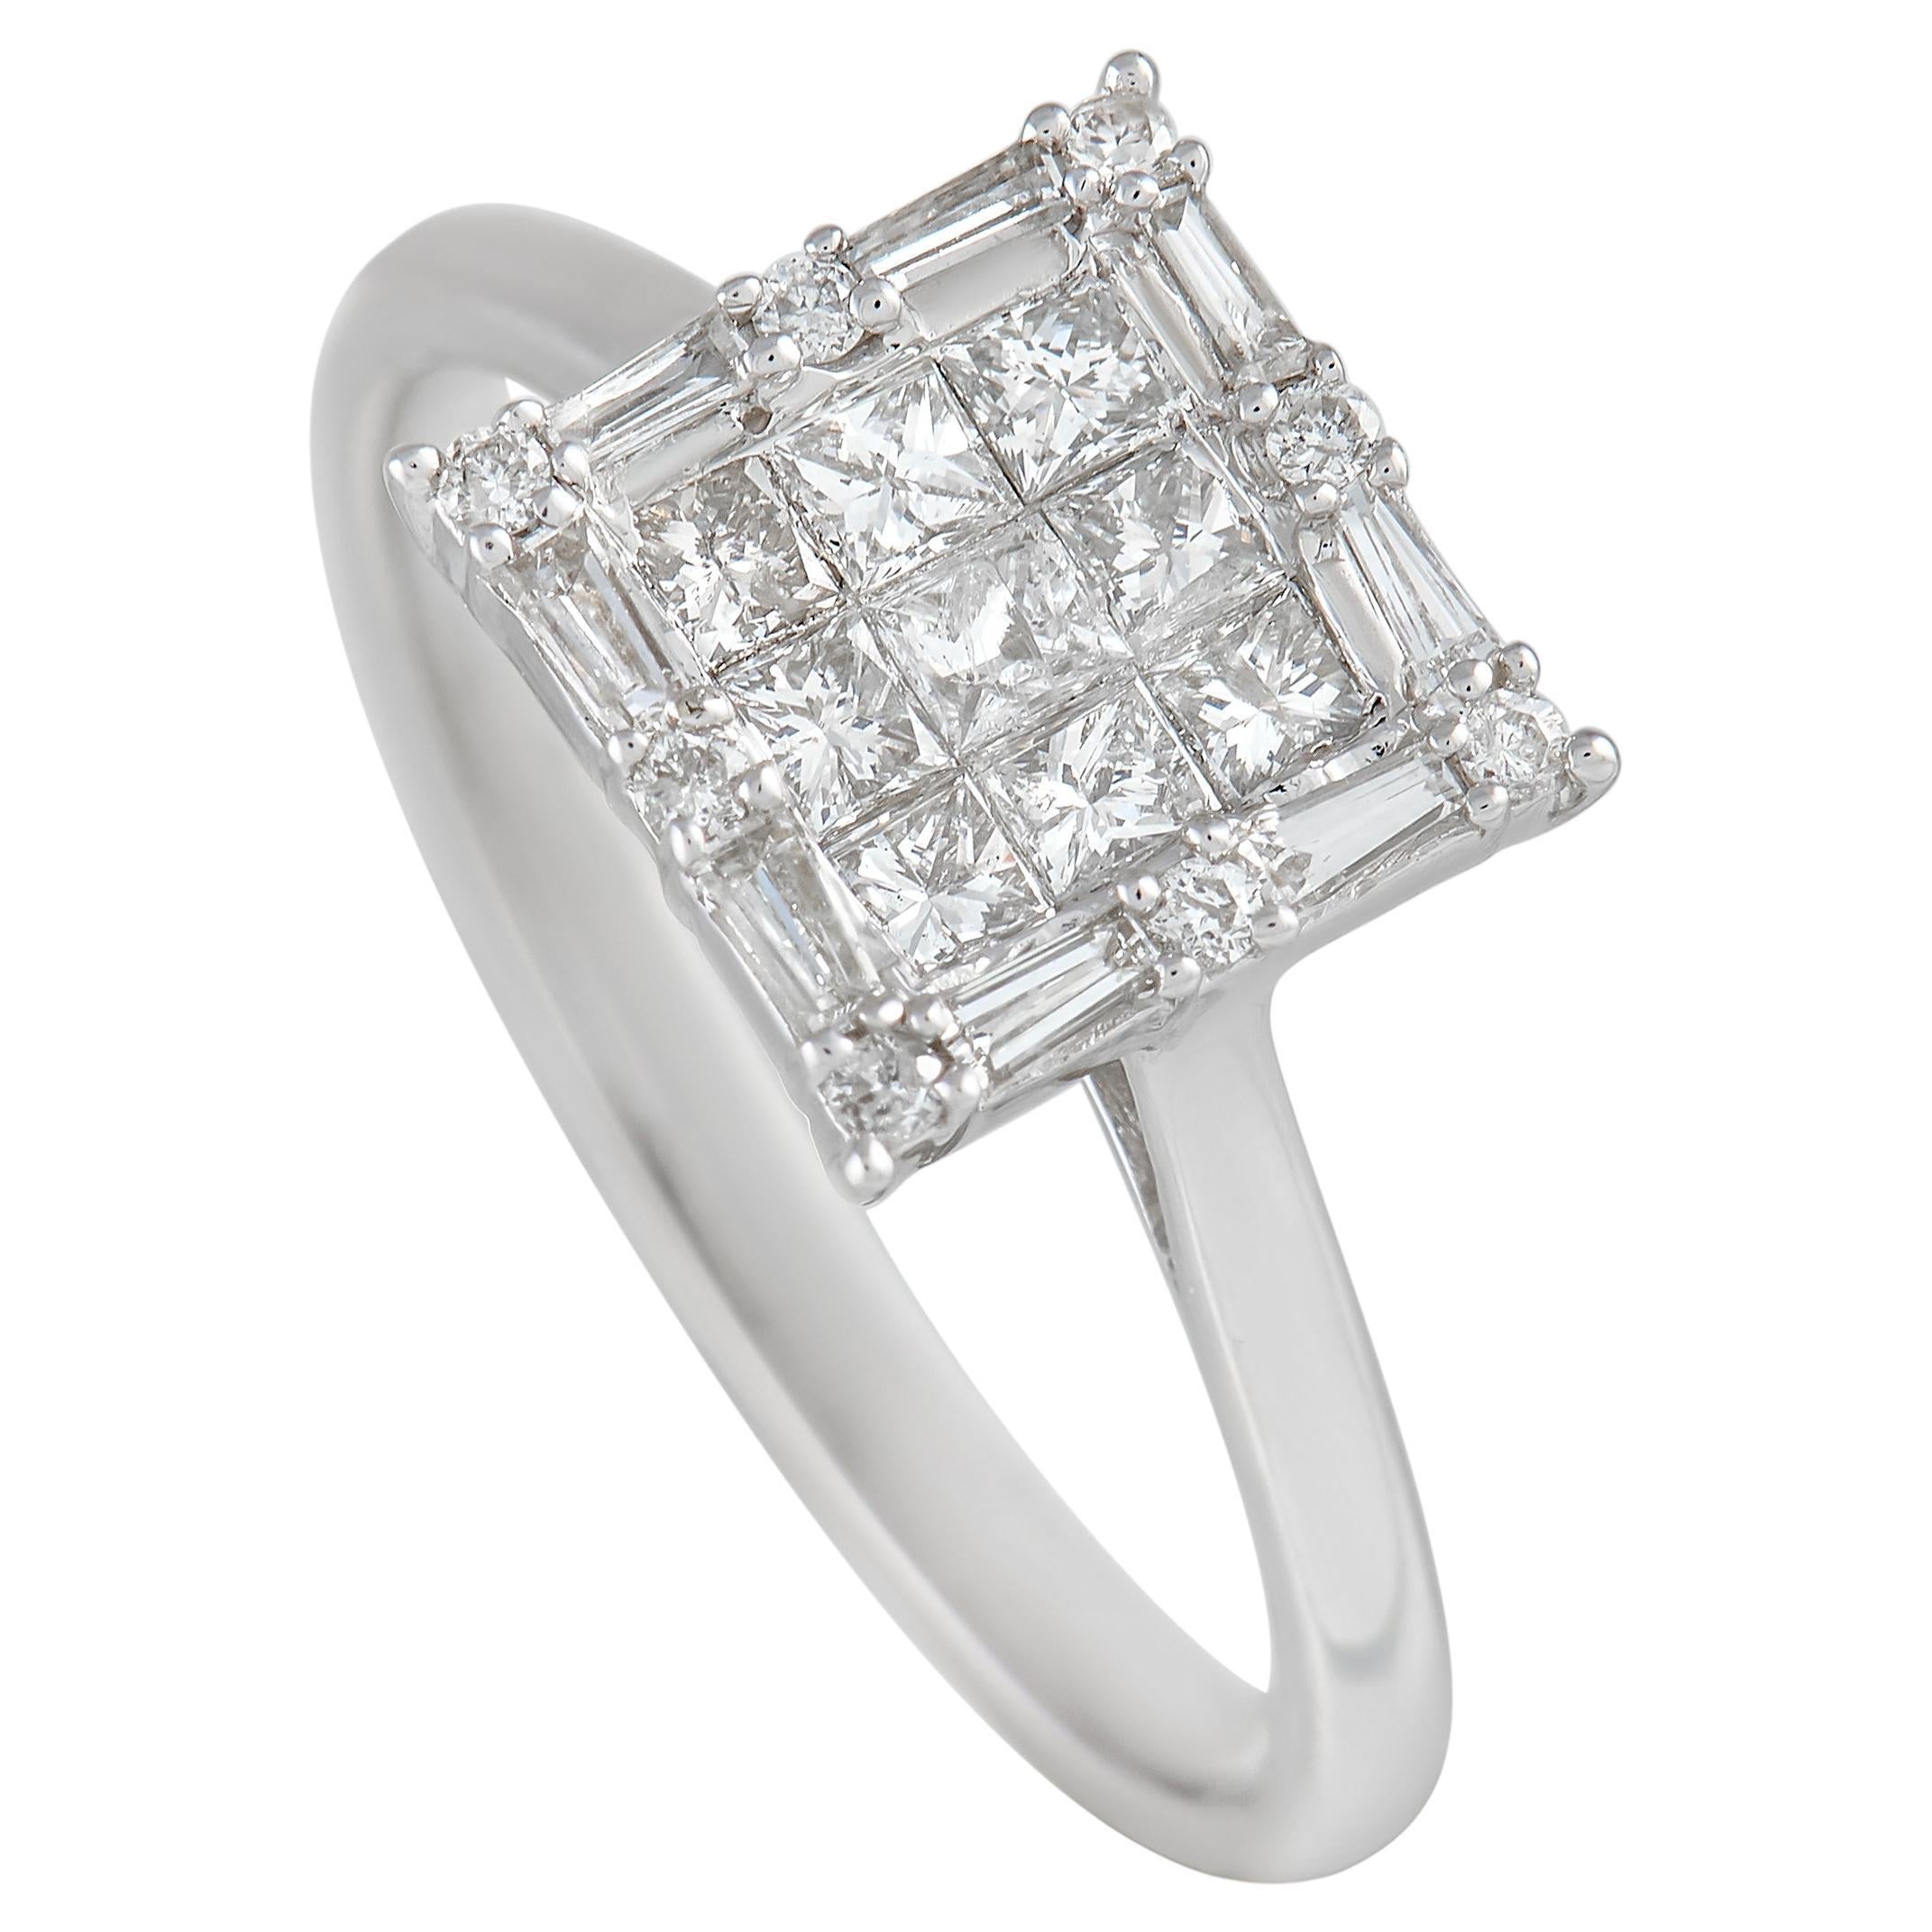 LB Exclusive 14K White Gold 0.65 ct Diamond Ring For Sale